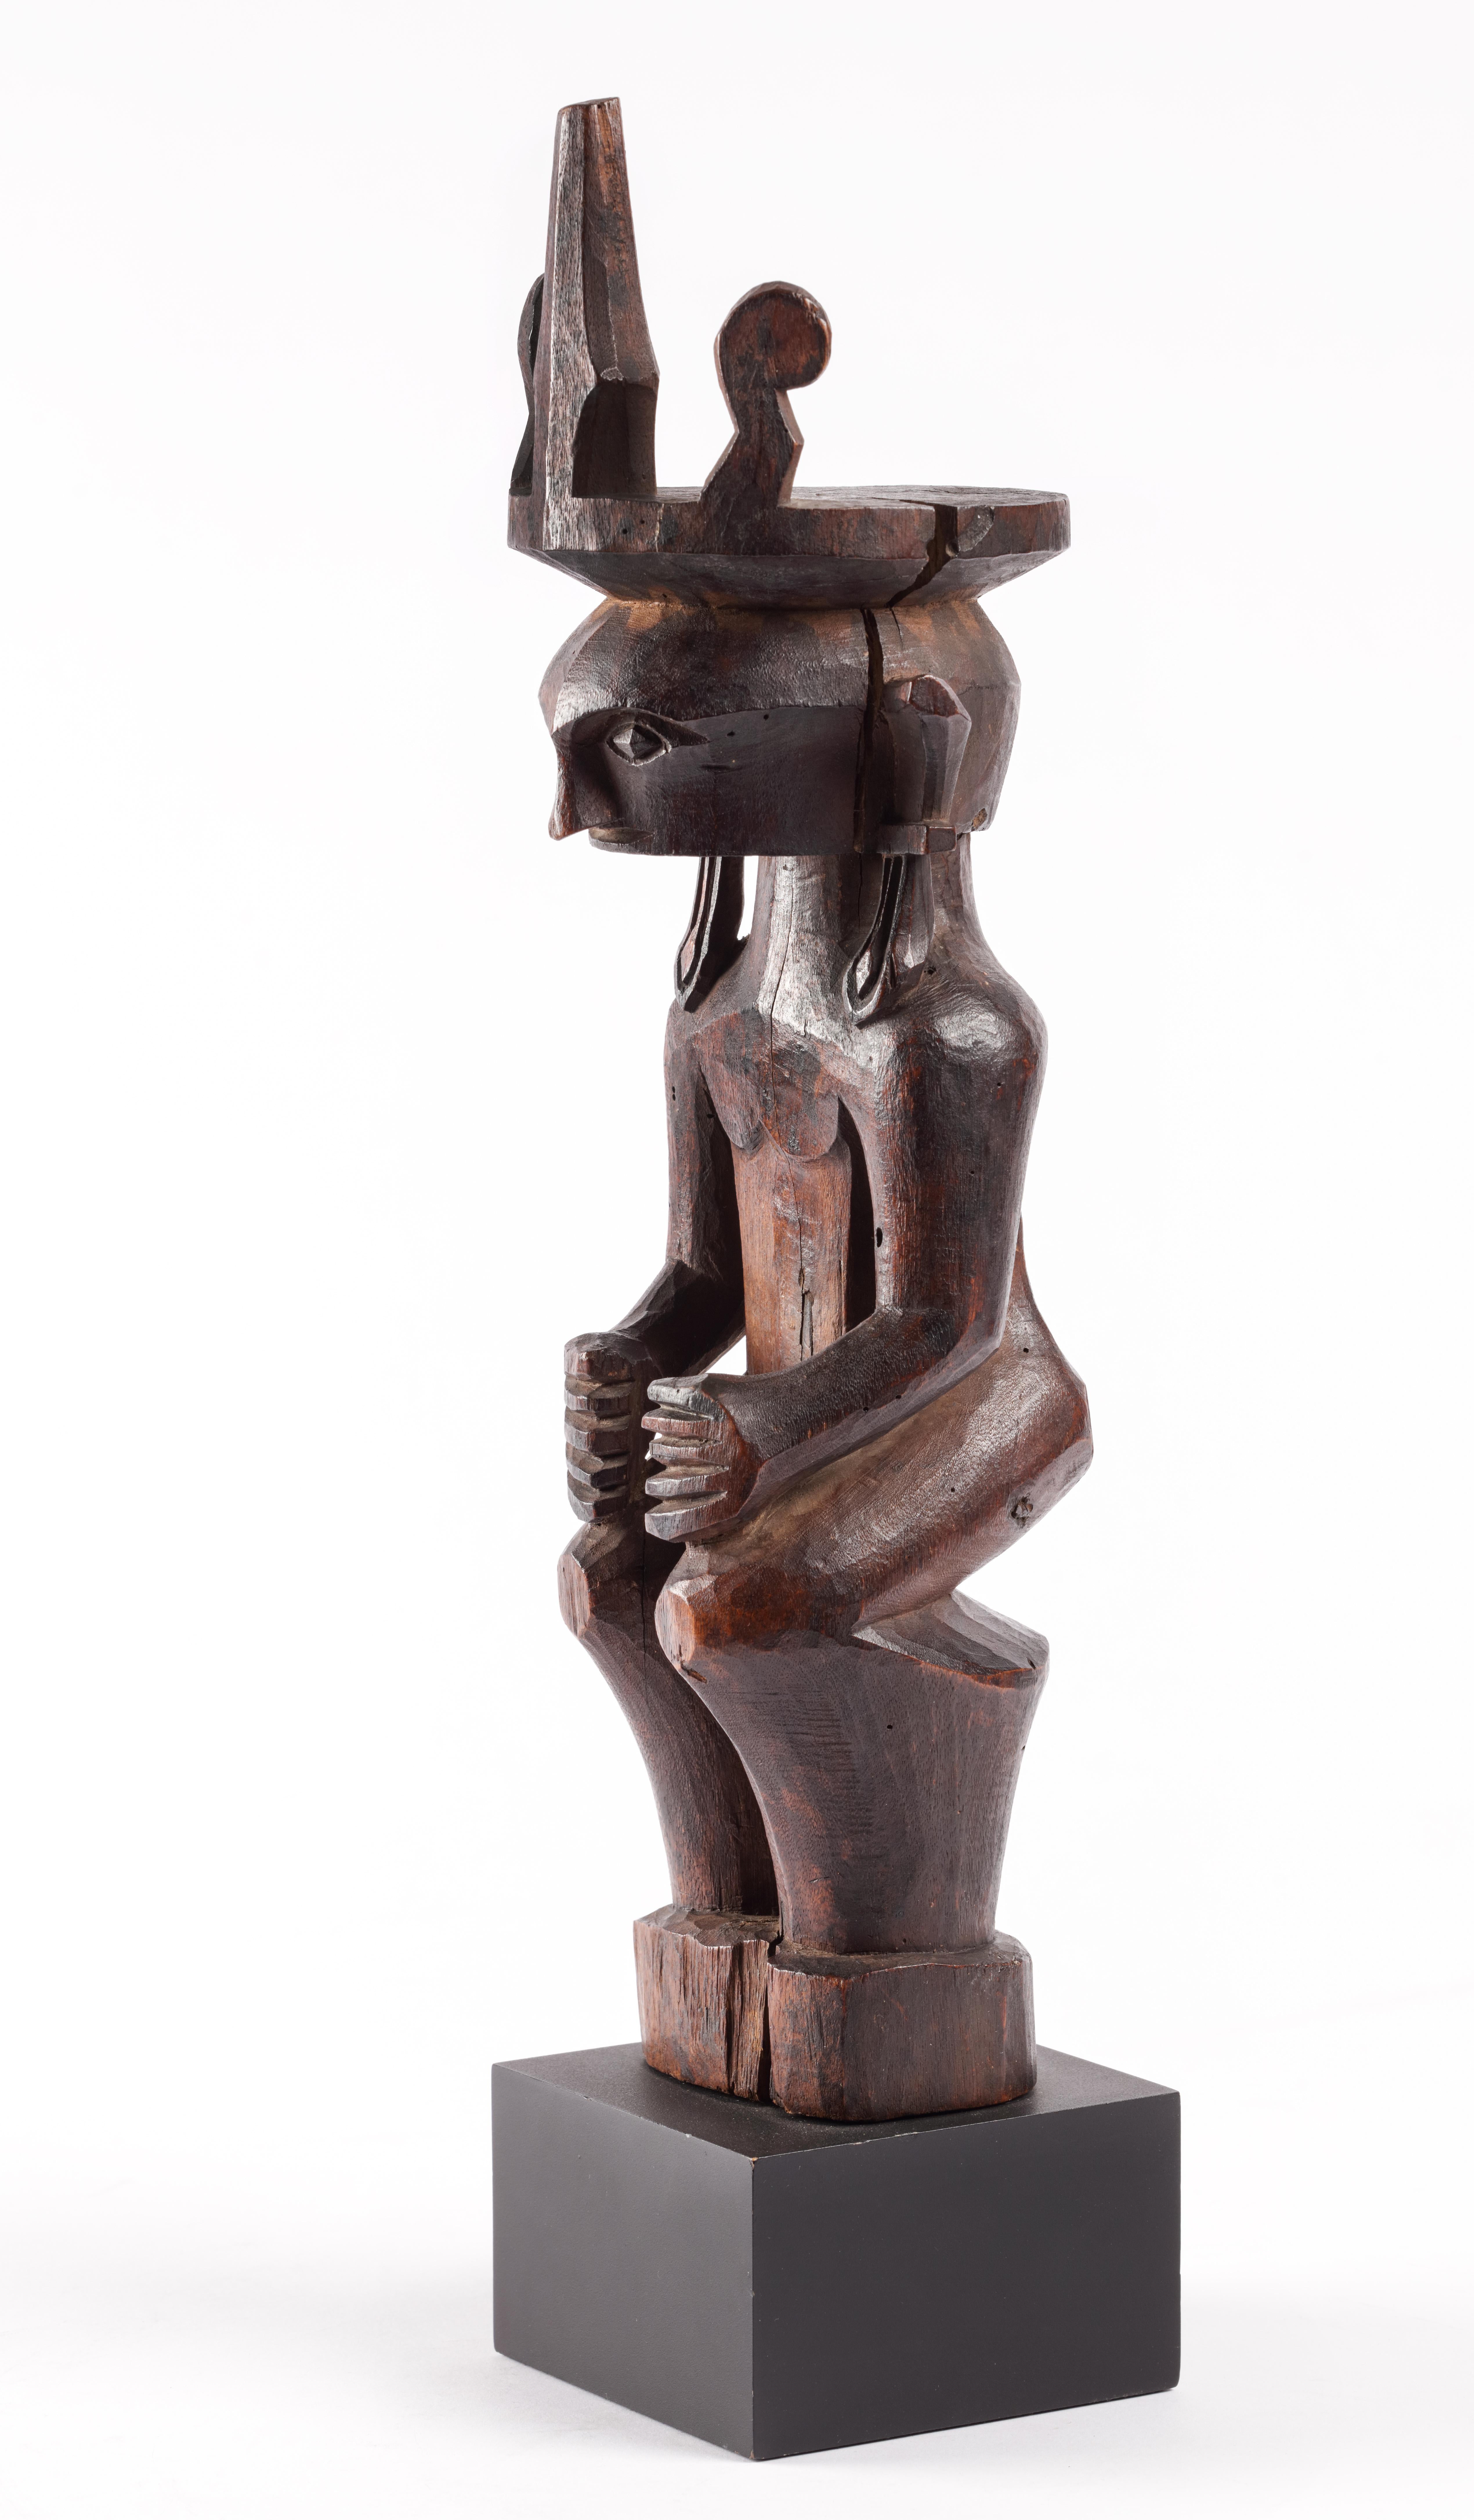 Indonesia, Nias, 19th century 

H. 37.5 x W. 10 cm

Sculptures like the one present are not only decorative items but are believed to be vessels that house the spirits of ancestors and are used to communicate with them.

After the death of a person